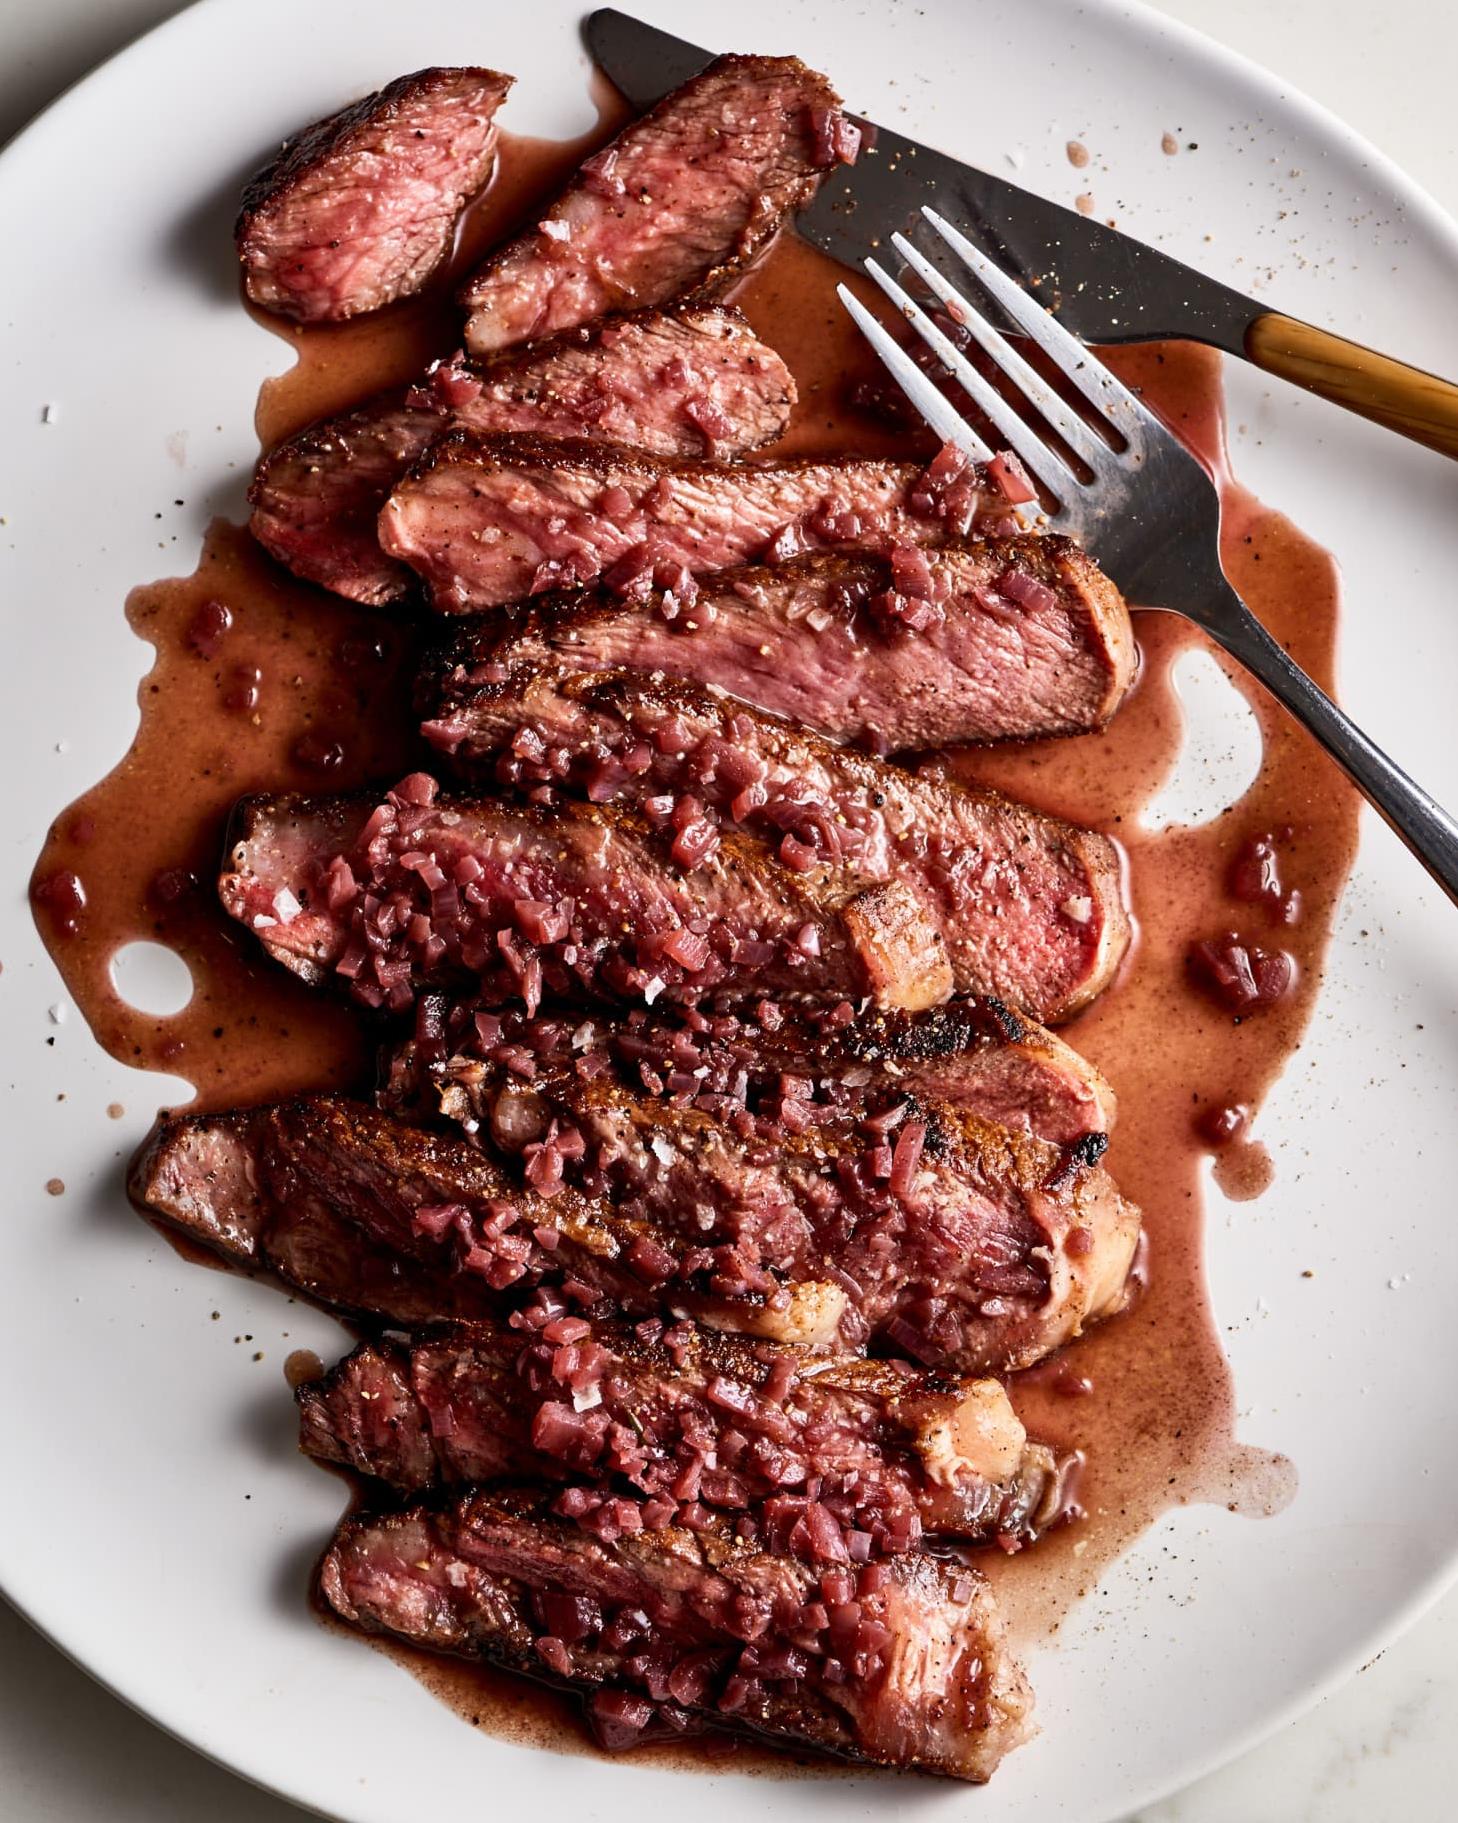  Slow-cooked beef smothered in rich red wine gravy